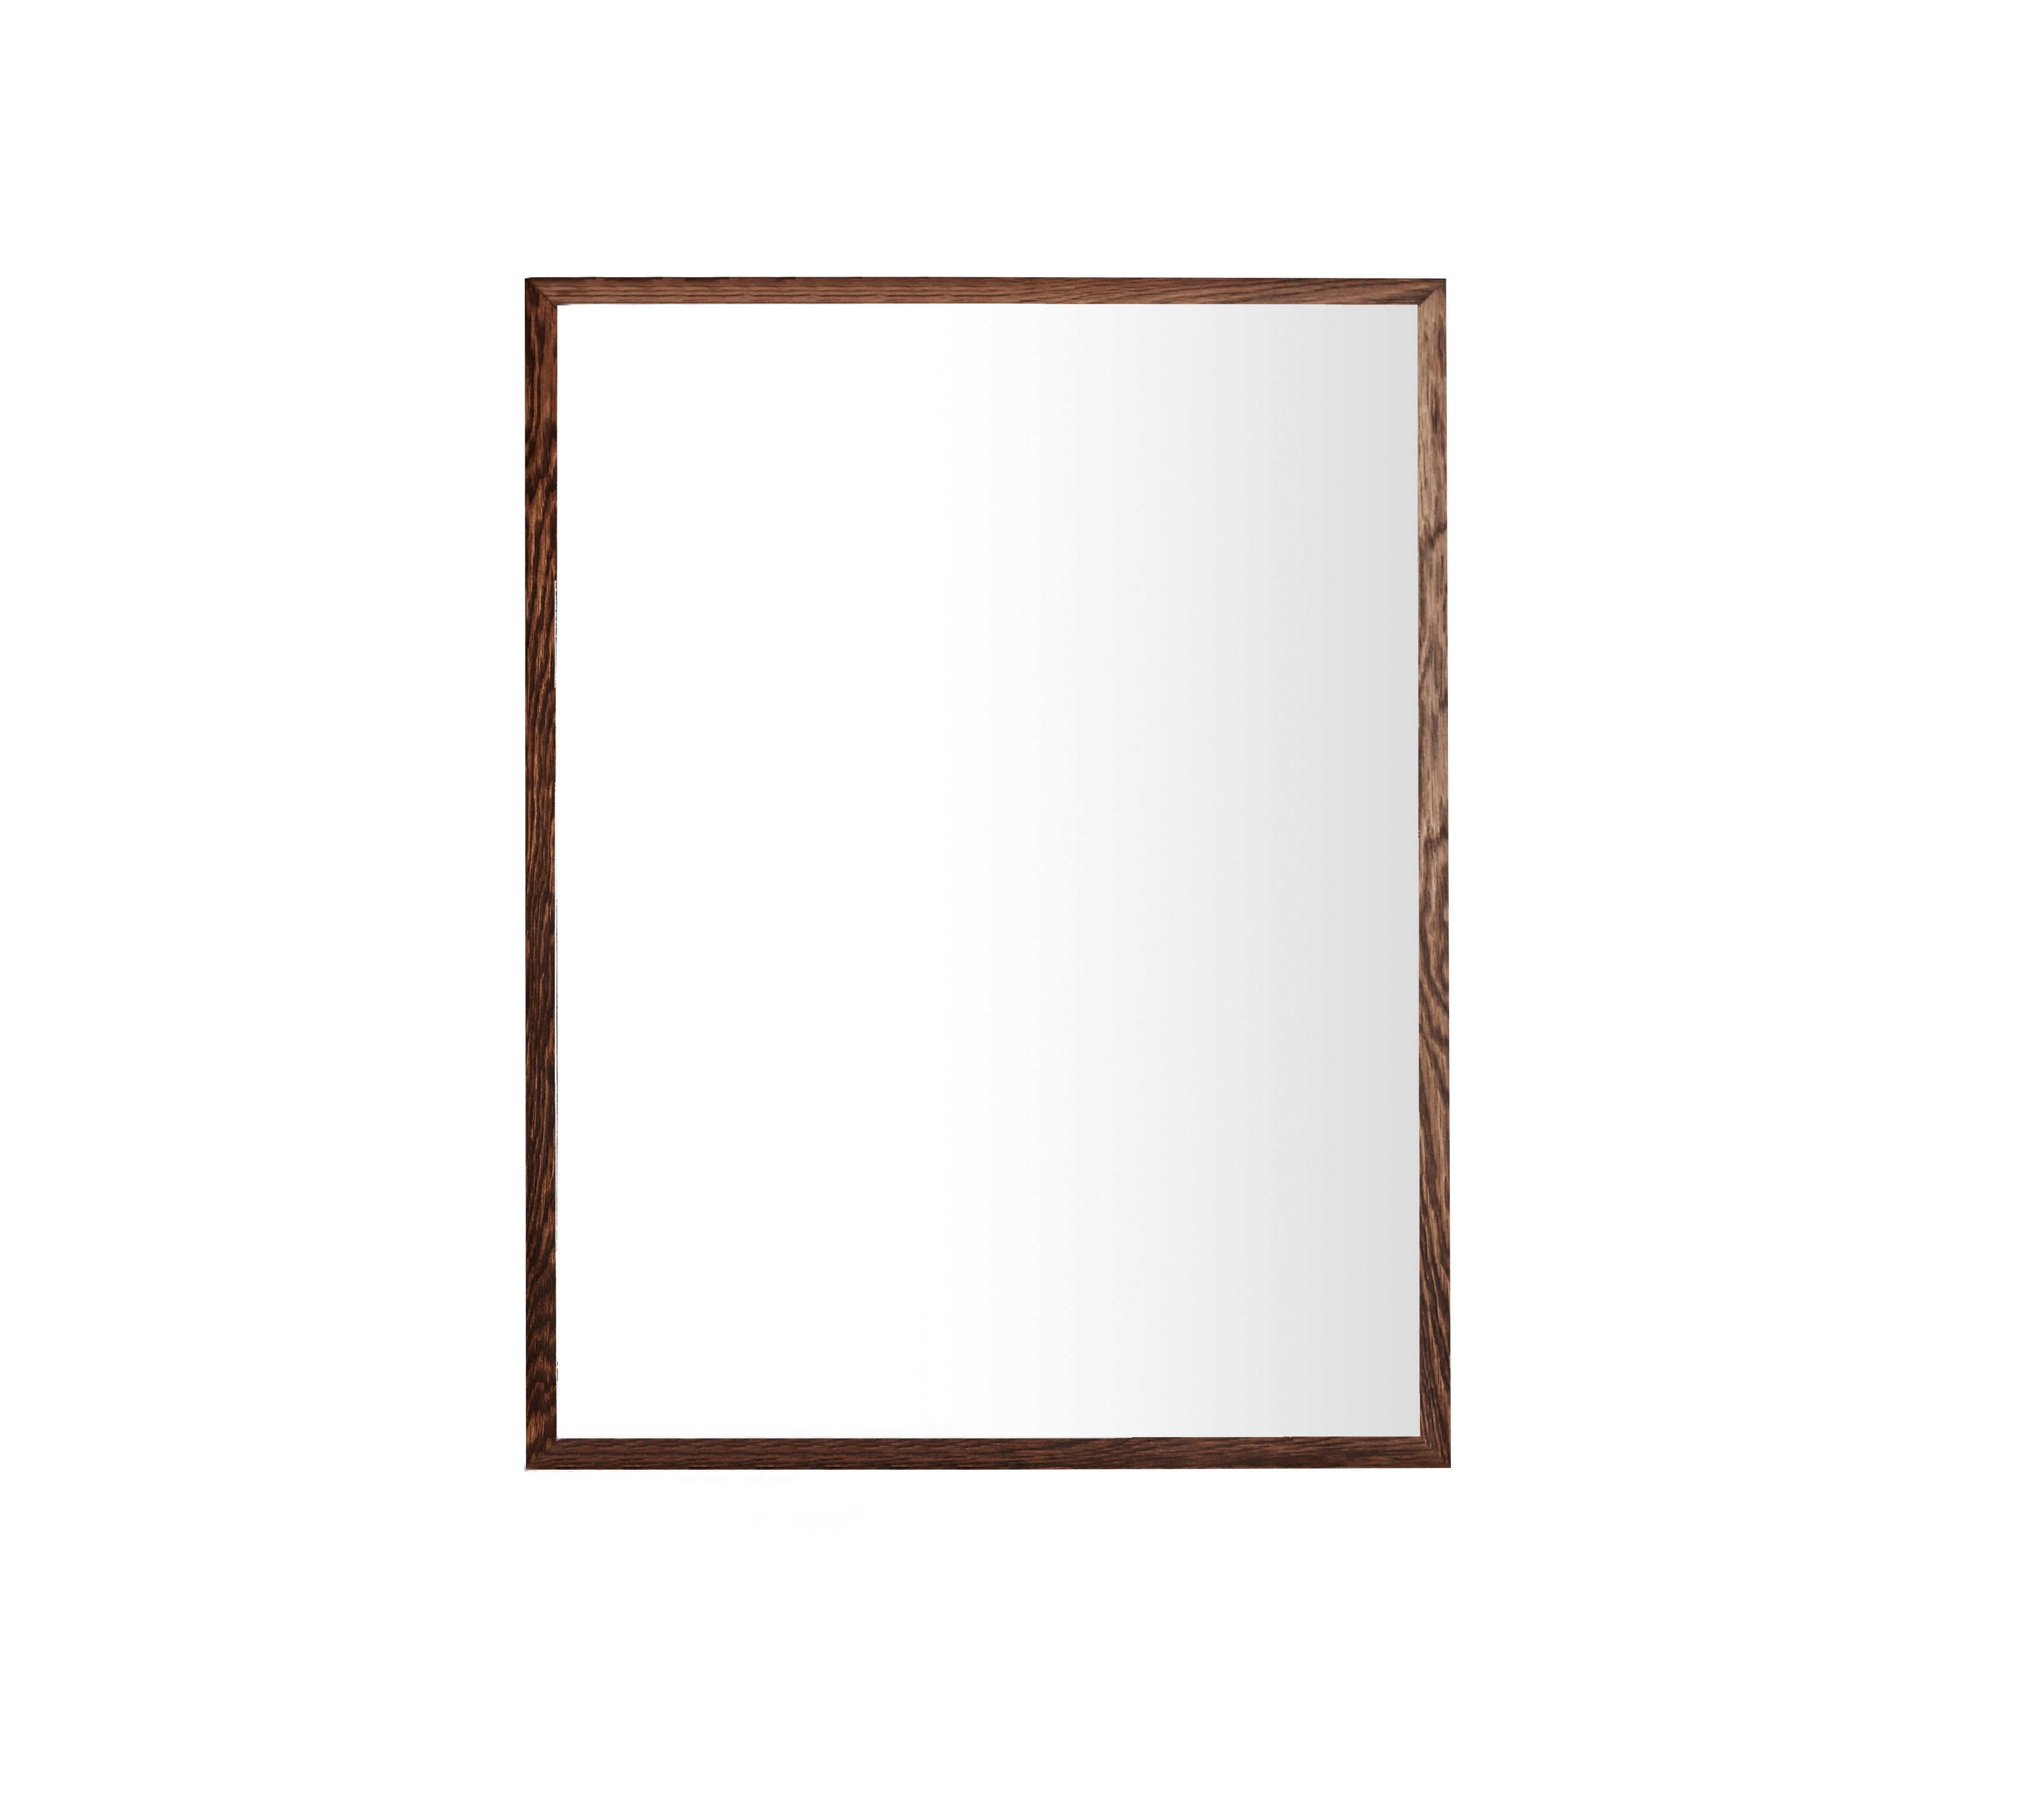 ISSY Z8 Butterfly Rectangle Mirror 500x930 - Zuster Furniture